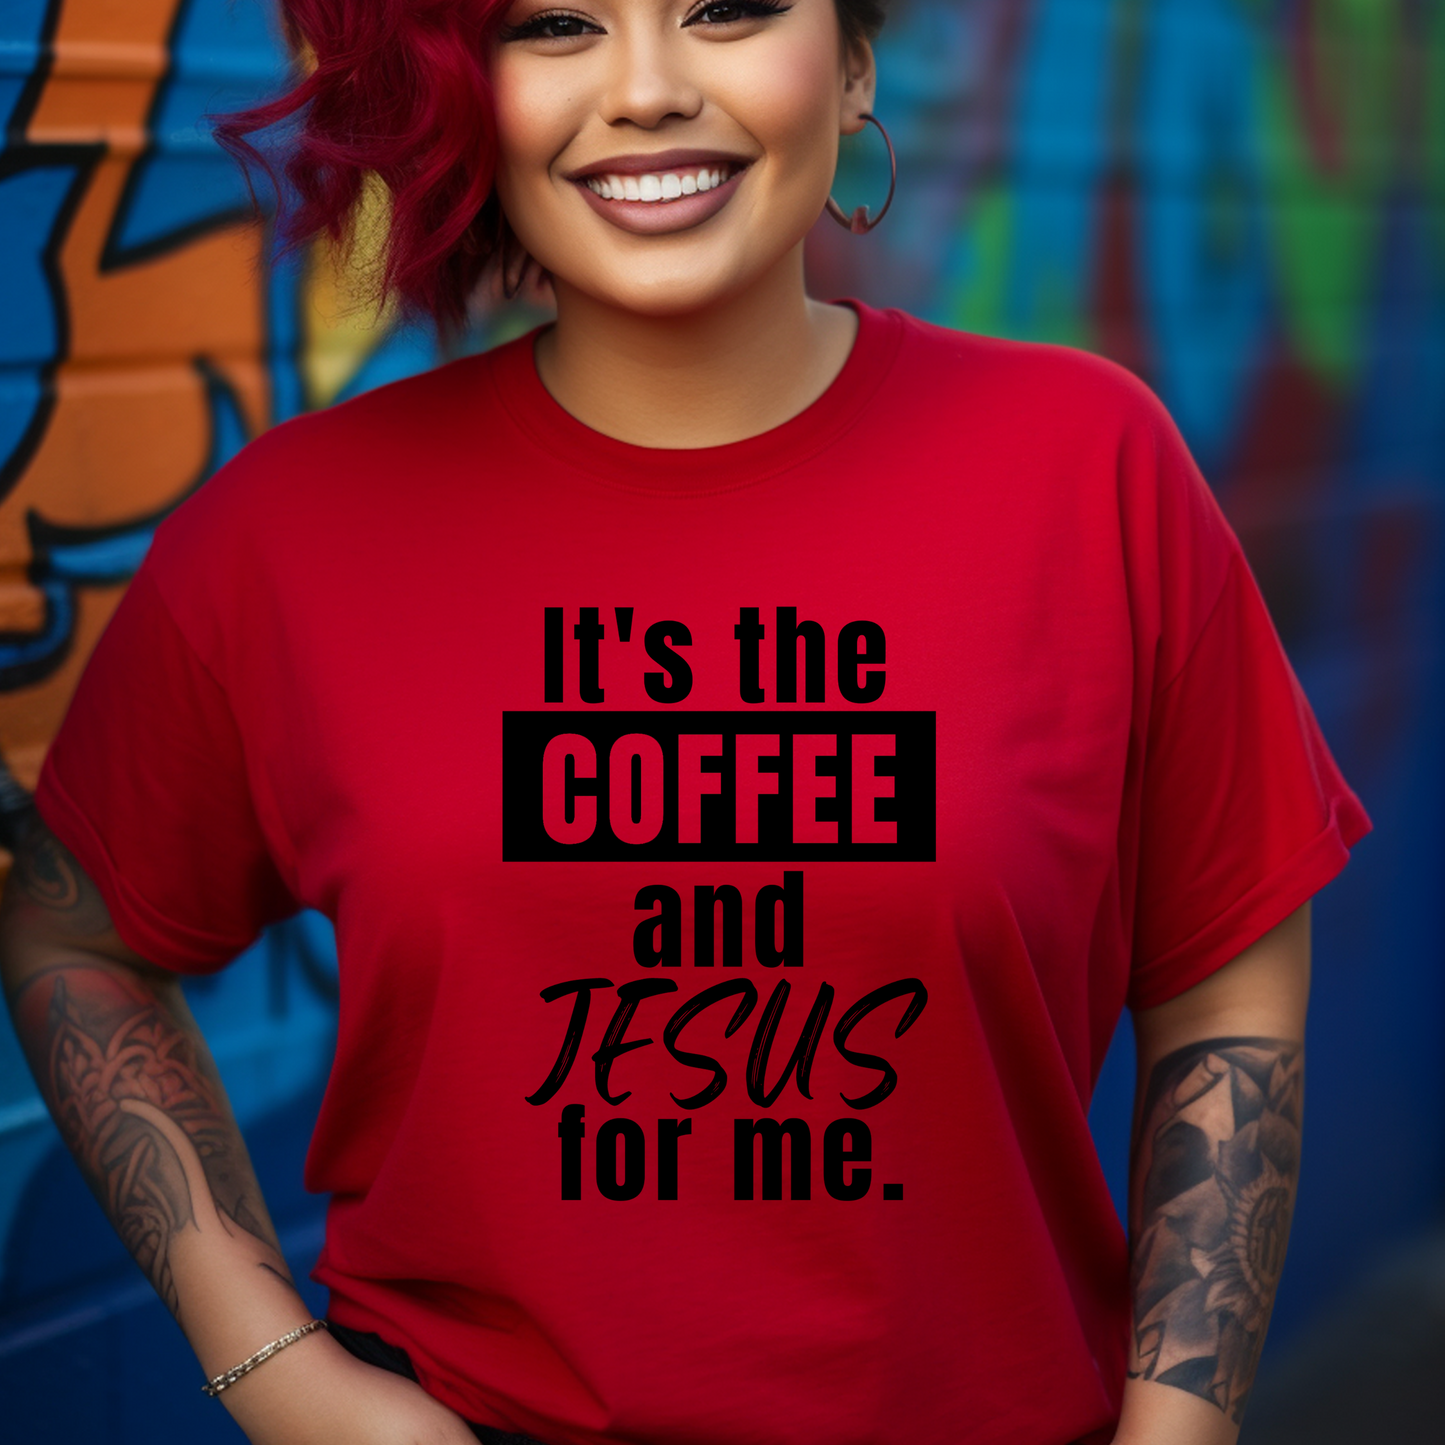 Stylish red 'It's the Coffee and Jesus for Me' T-shirt from Triumph Tees. This faith-based apparel is a perfect blend of comfort and style for coffee lovers and believers alike.